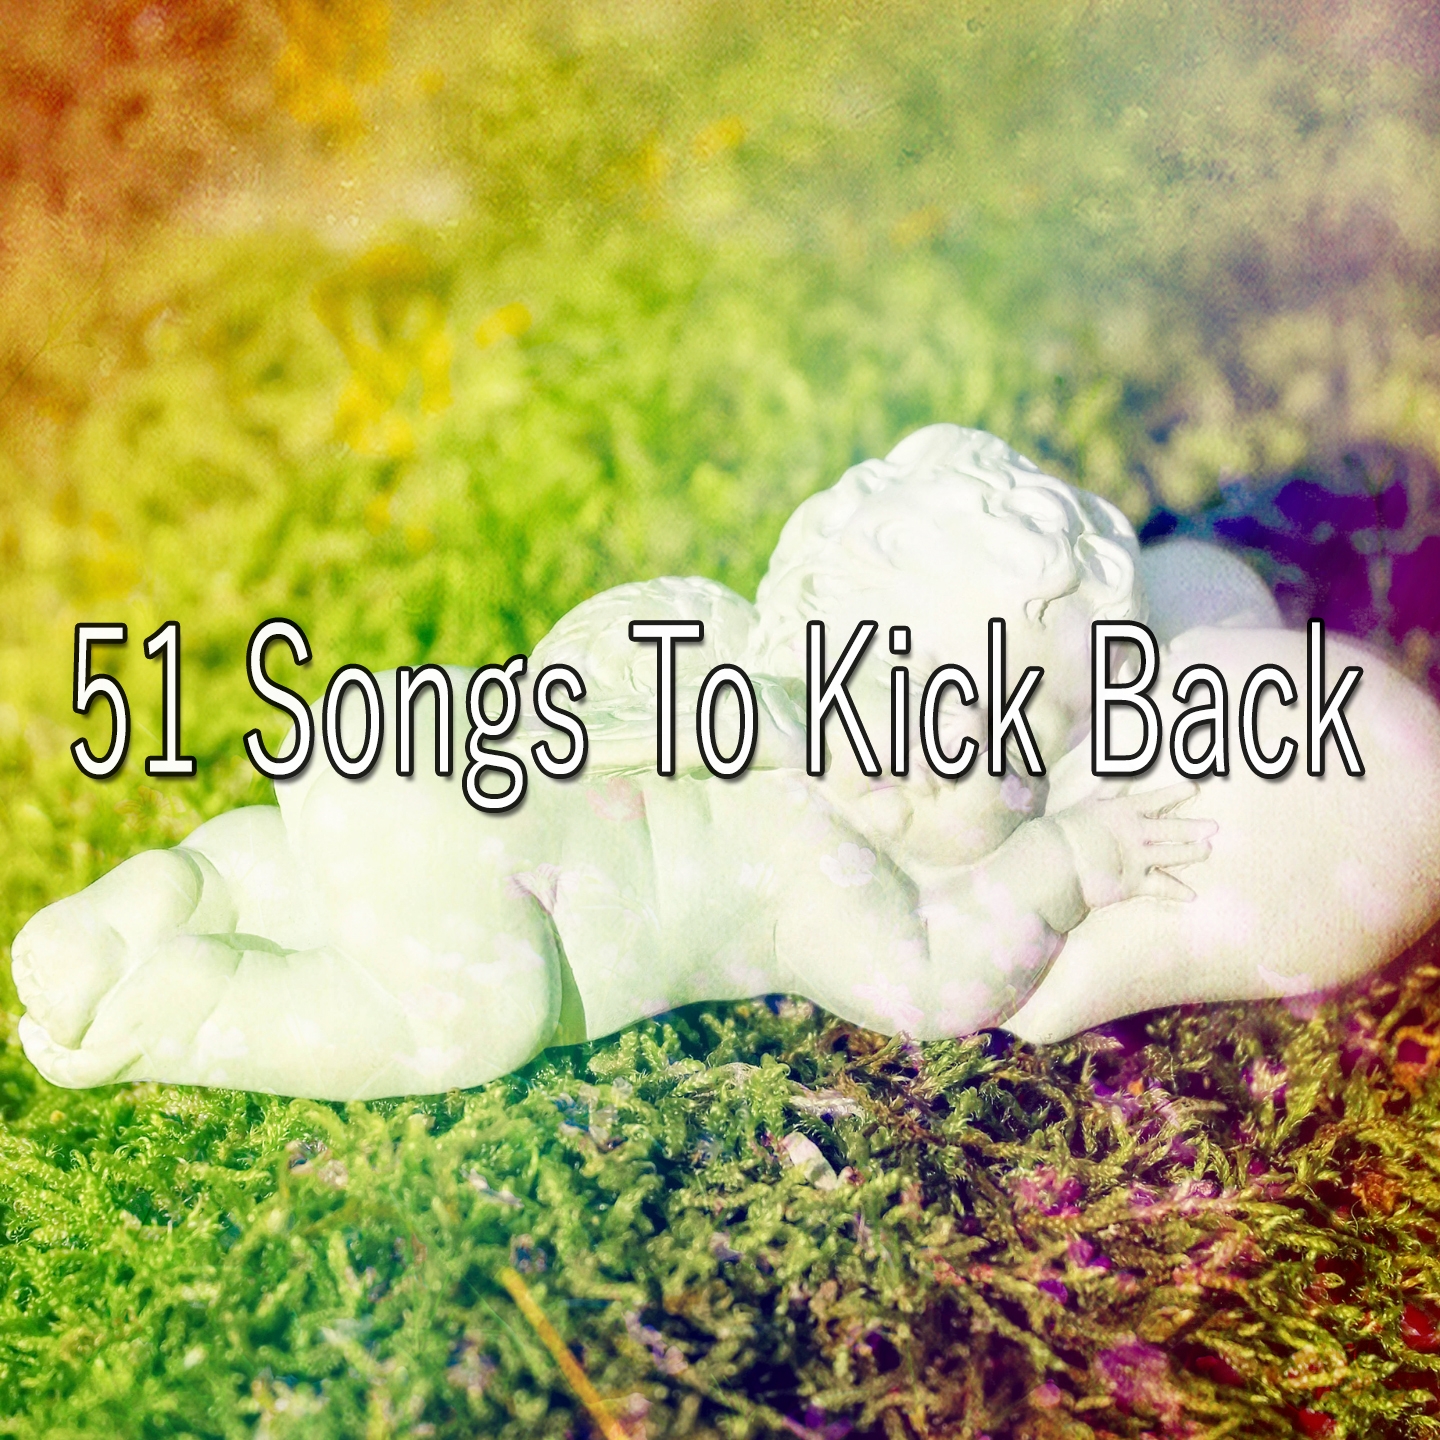 51 Songs To Kick Back